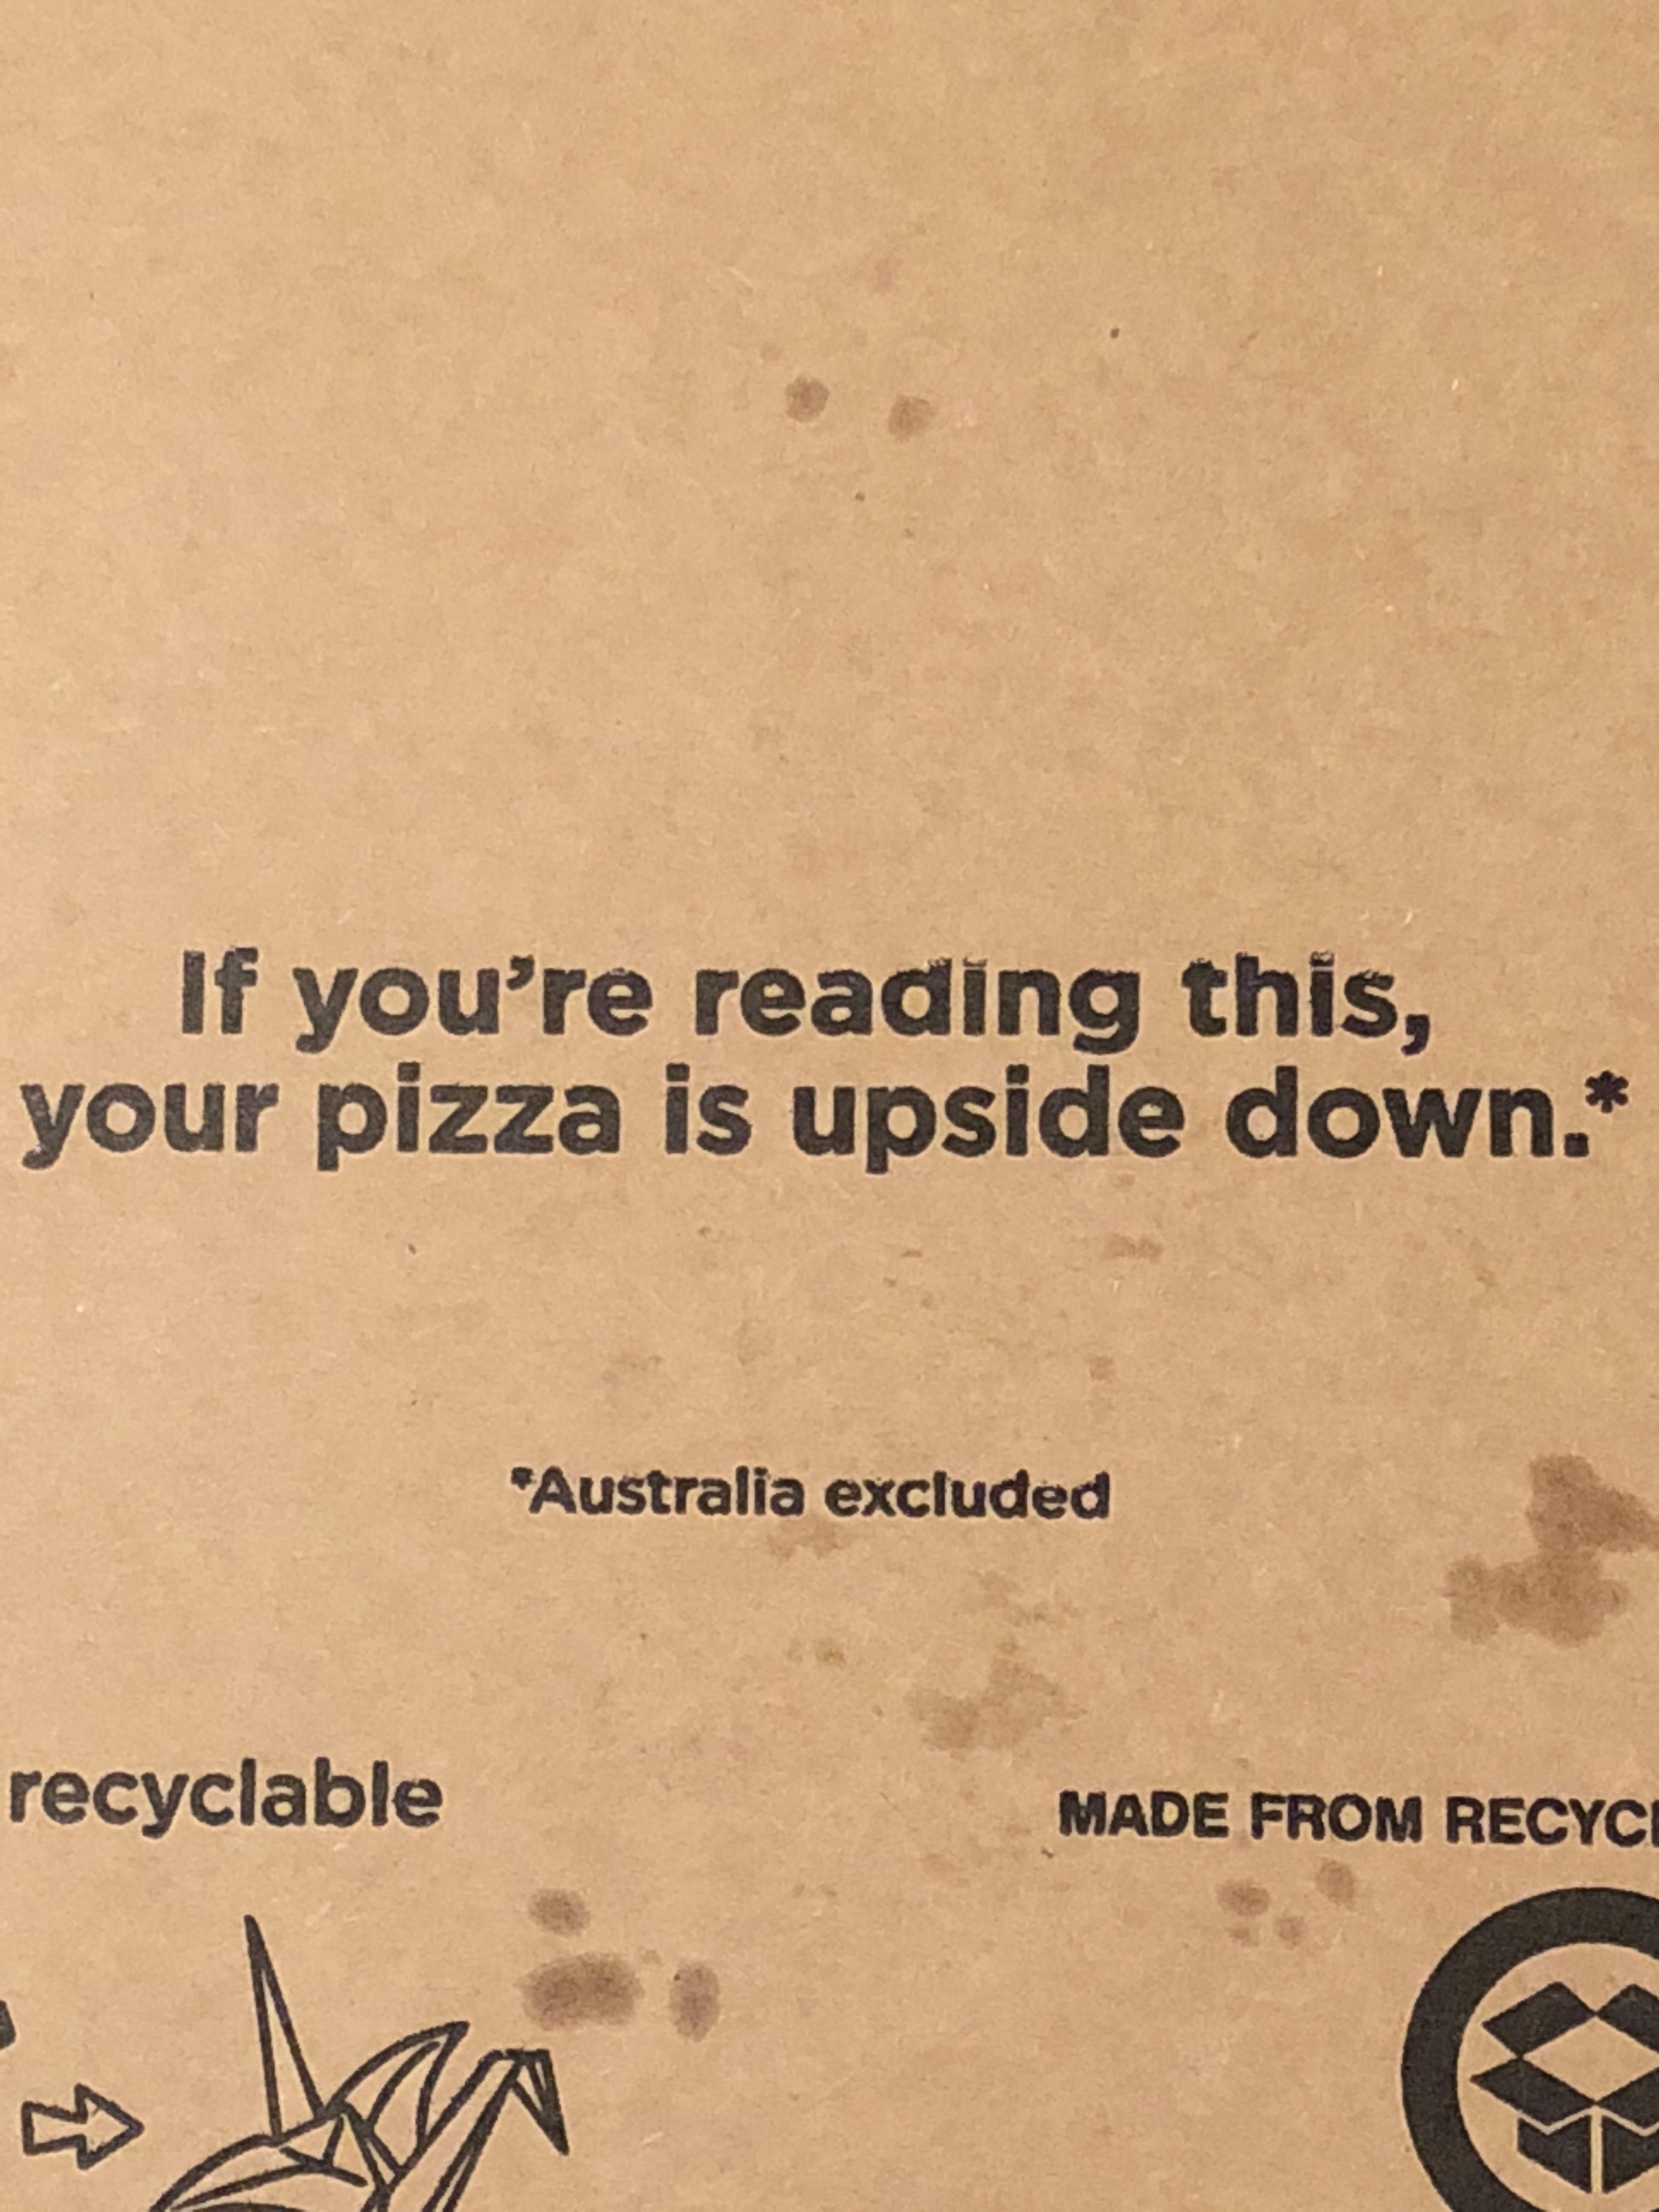 Found on the bottom of my pizza box